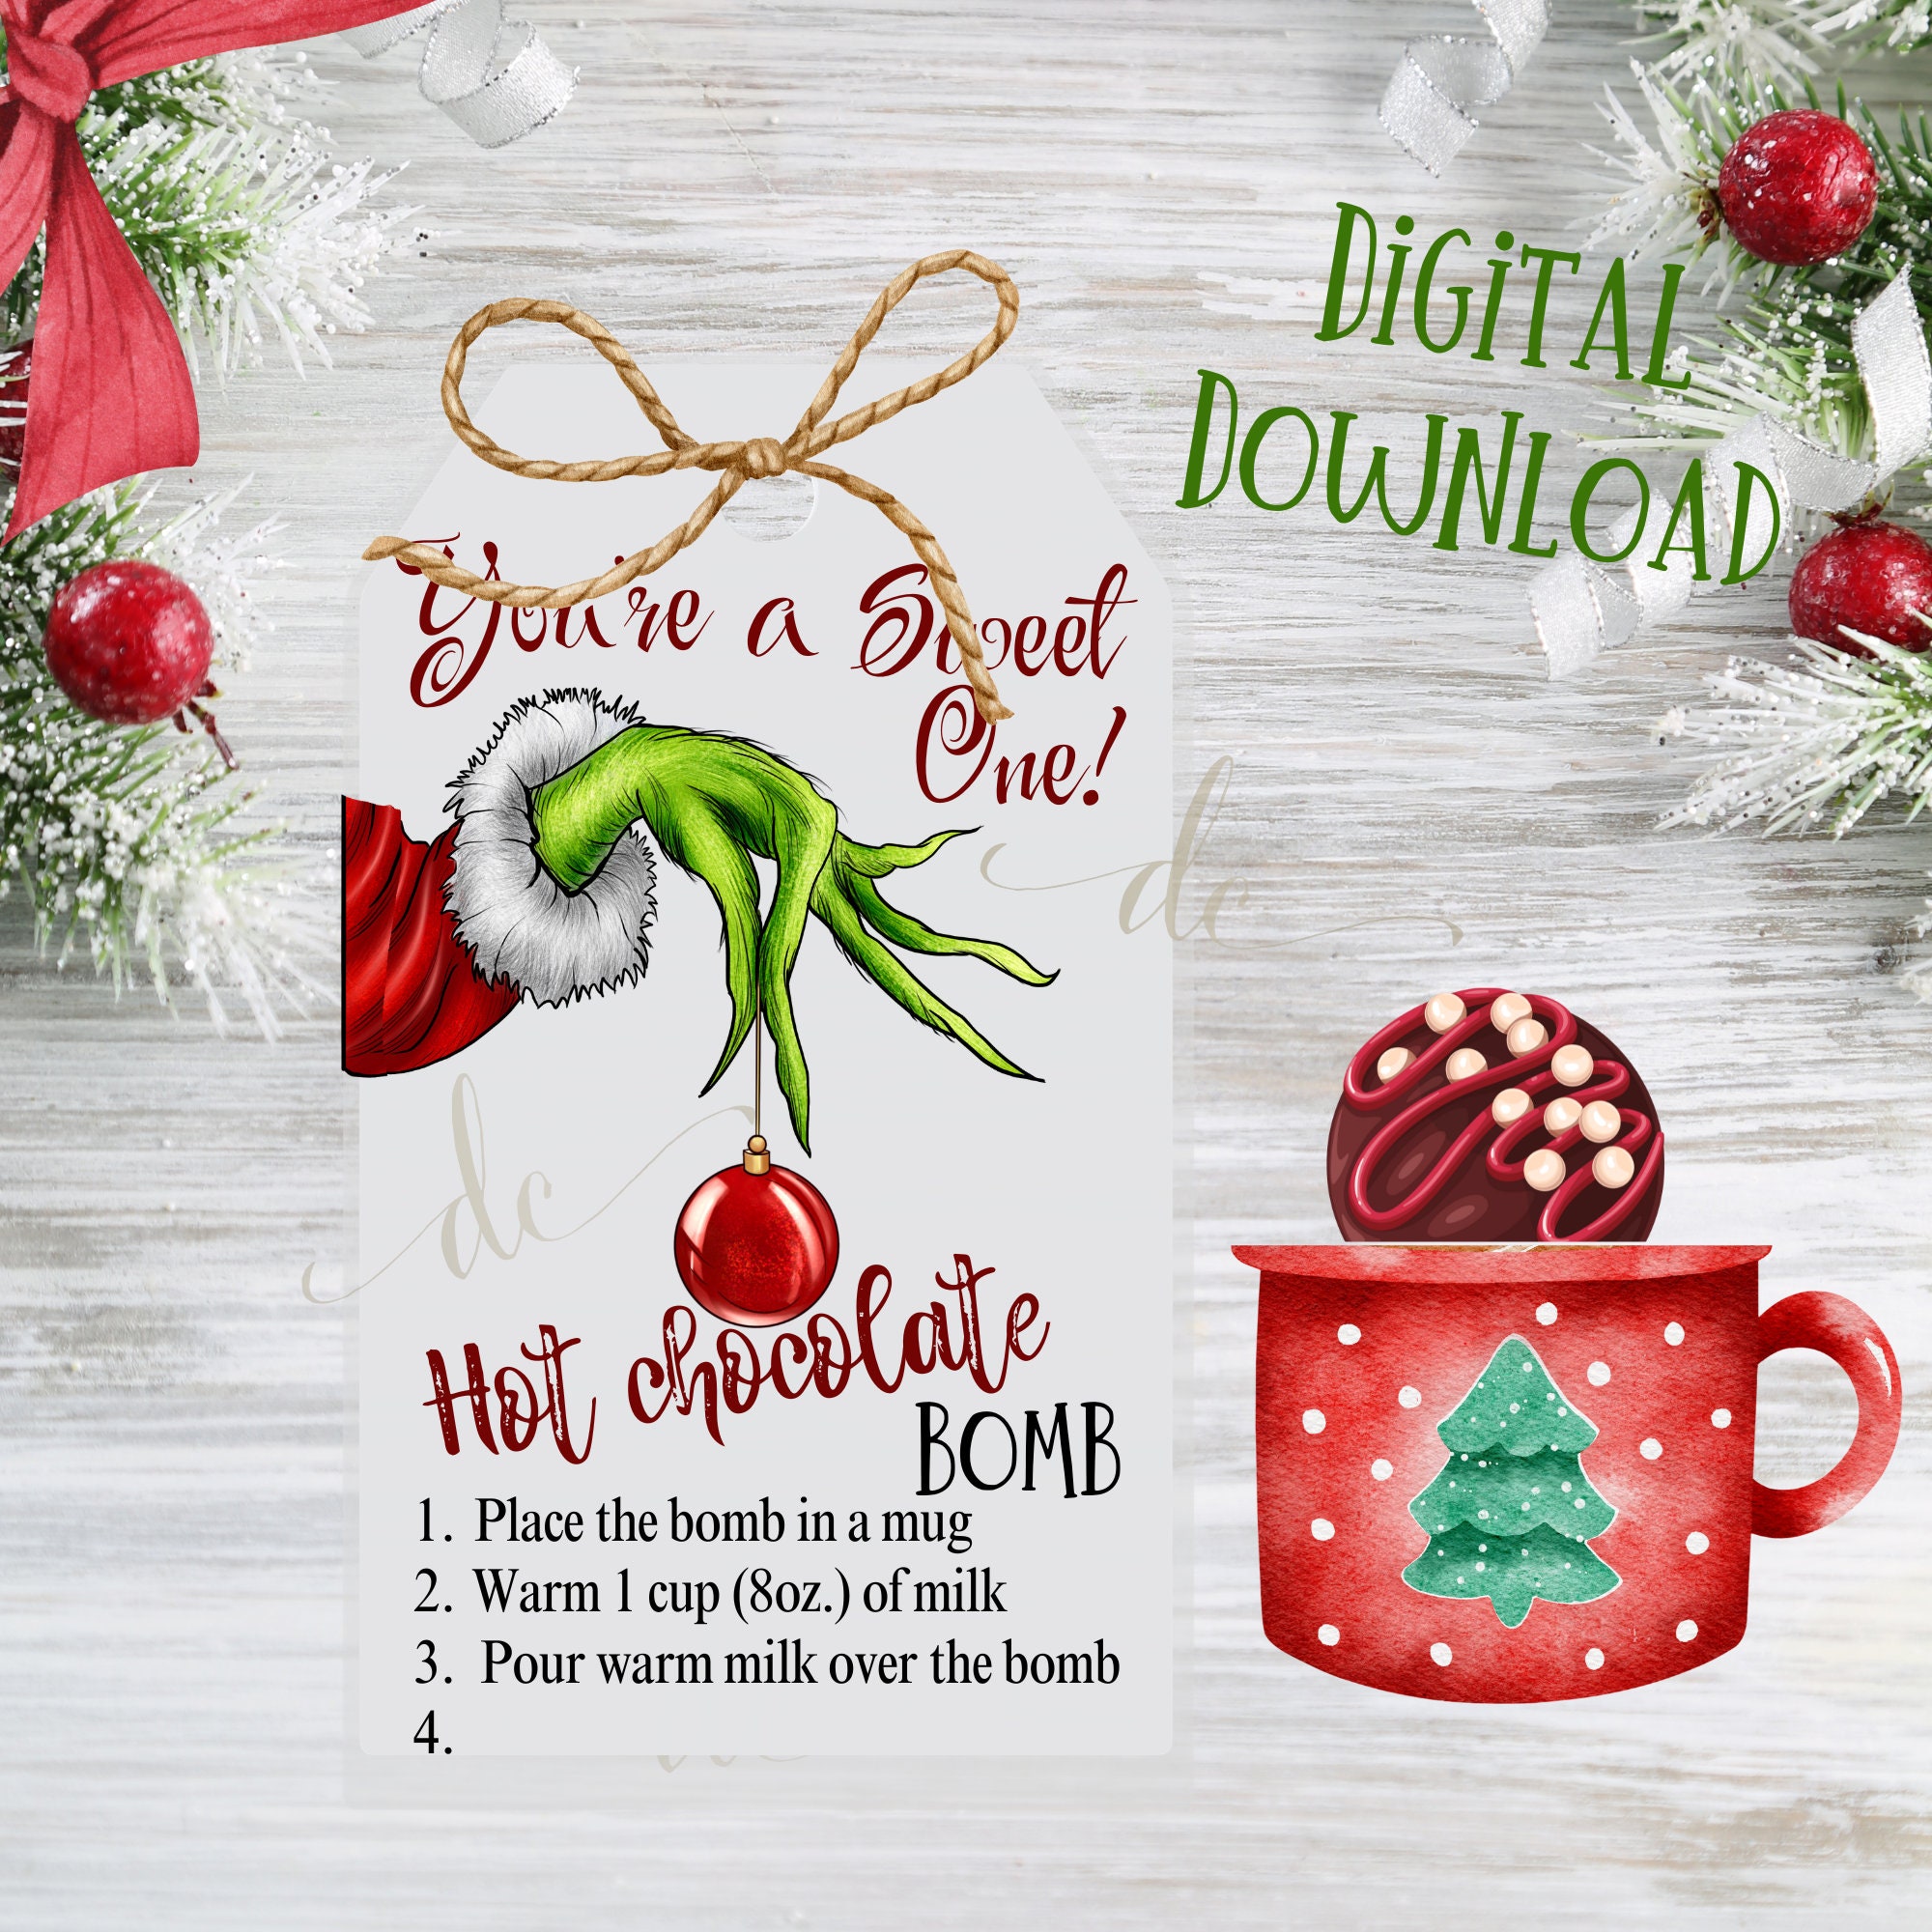 Lisa Marie's - ❤️❤️❤️❤️ THE GRINCH IS BACK!! ❤️❤️❤️❤️❤️ GRINCH HOT COCOA  BOMB GIFT SETS!! Will be available the whole month of December until  supplies run out! These will not last long!!